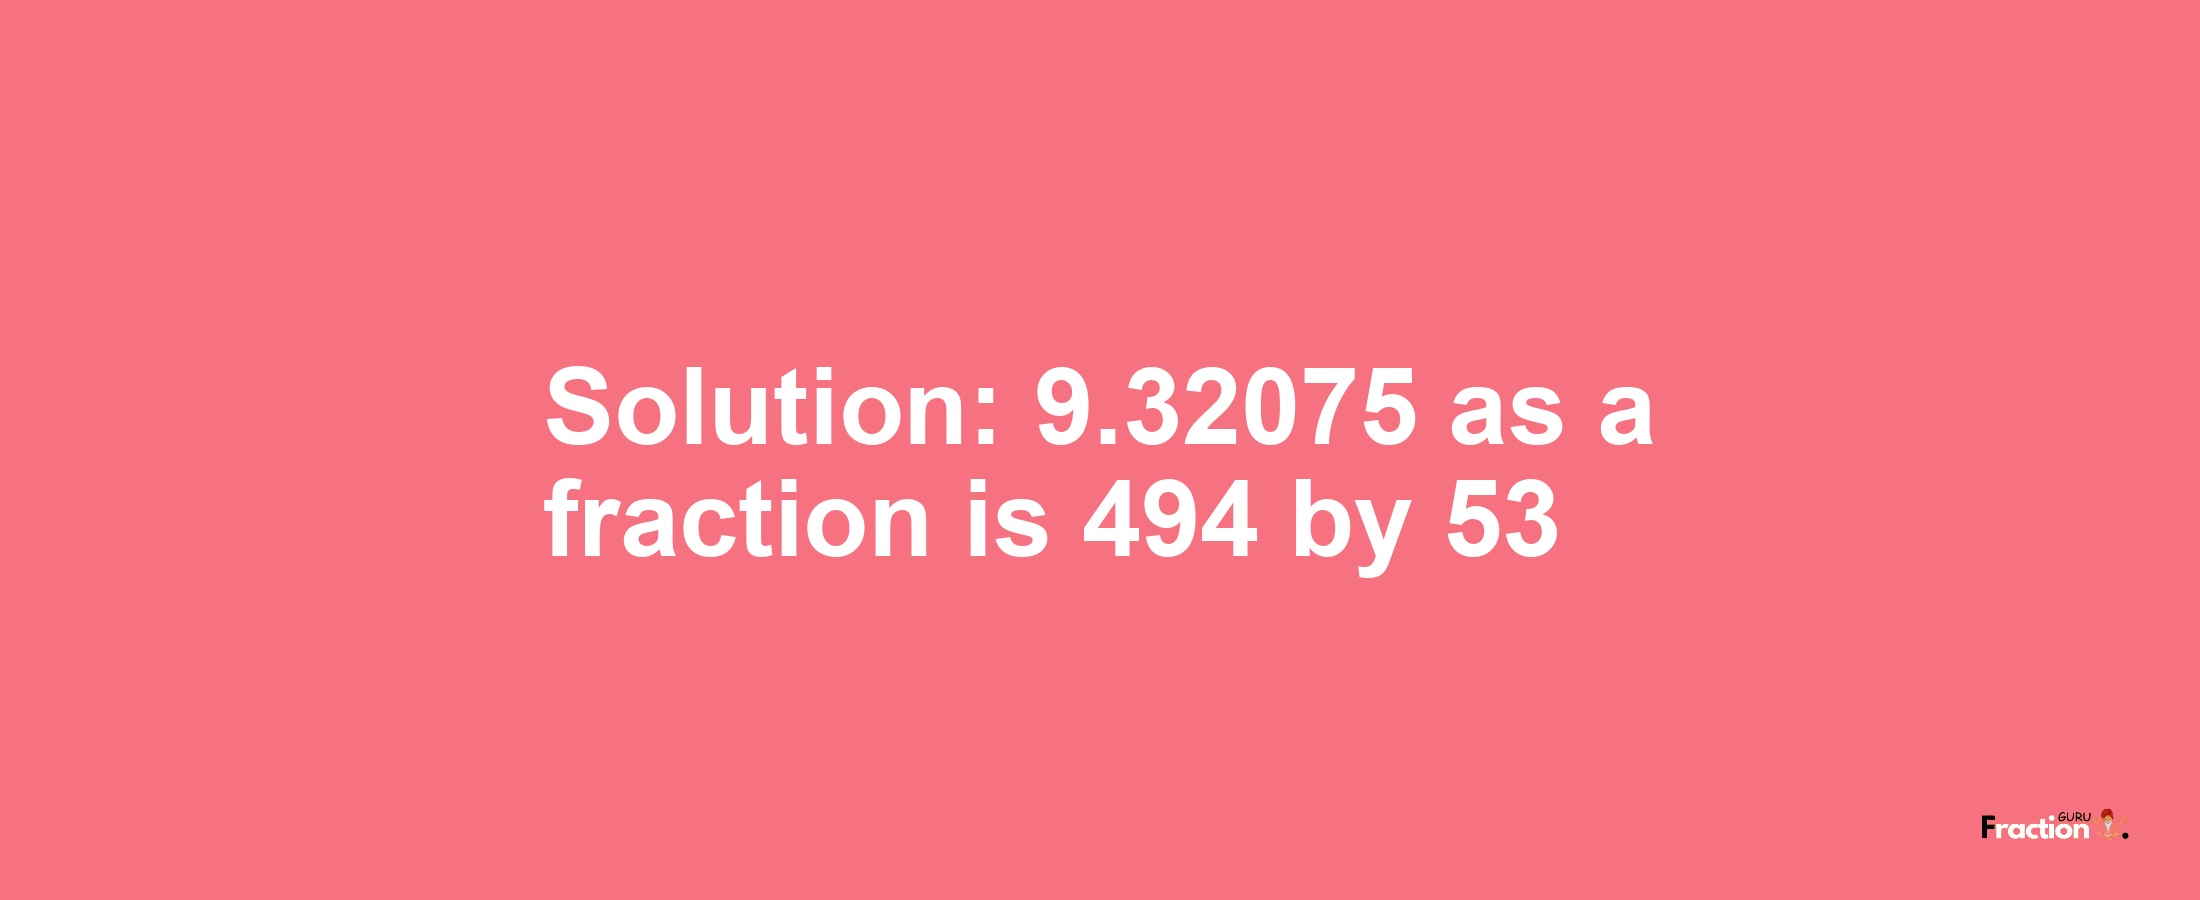 Solution:9.32075 as a fraction is 494/53